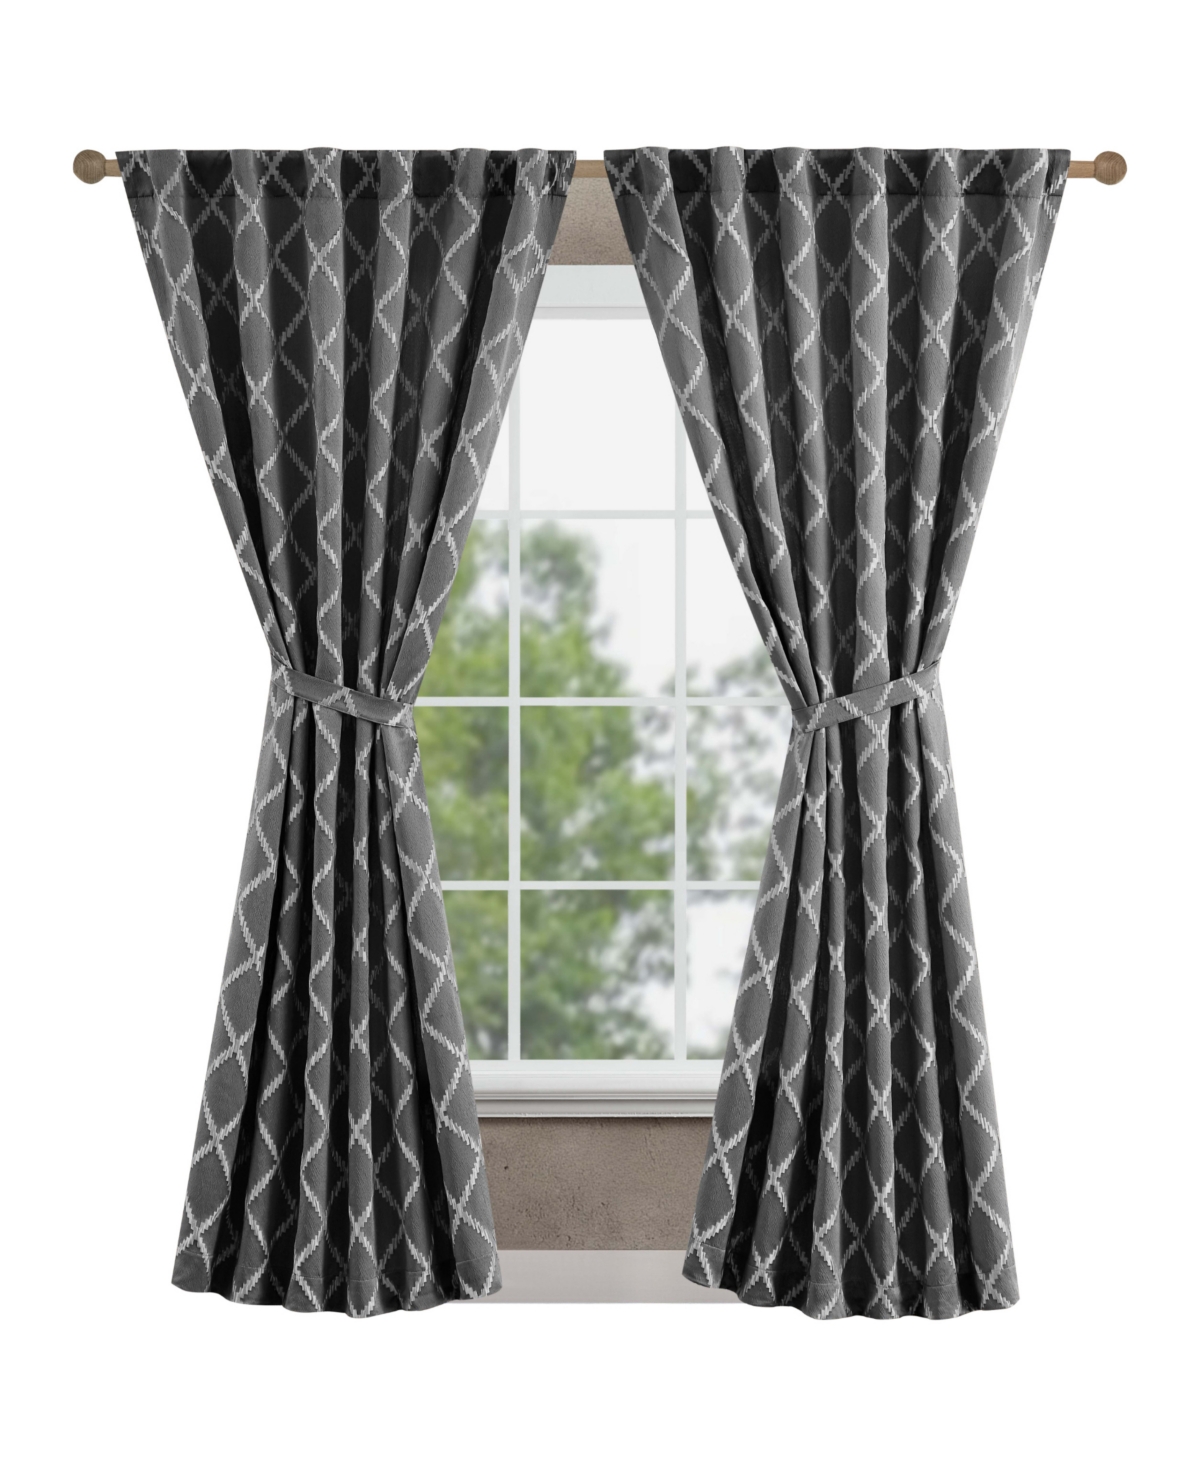 Jessica Simpson Lynee Textured Diamond Patterned Blackout Back-tab Window Curtain Panel Pair With Tiebacks, 52" X 96 In Gray